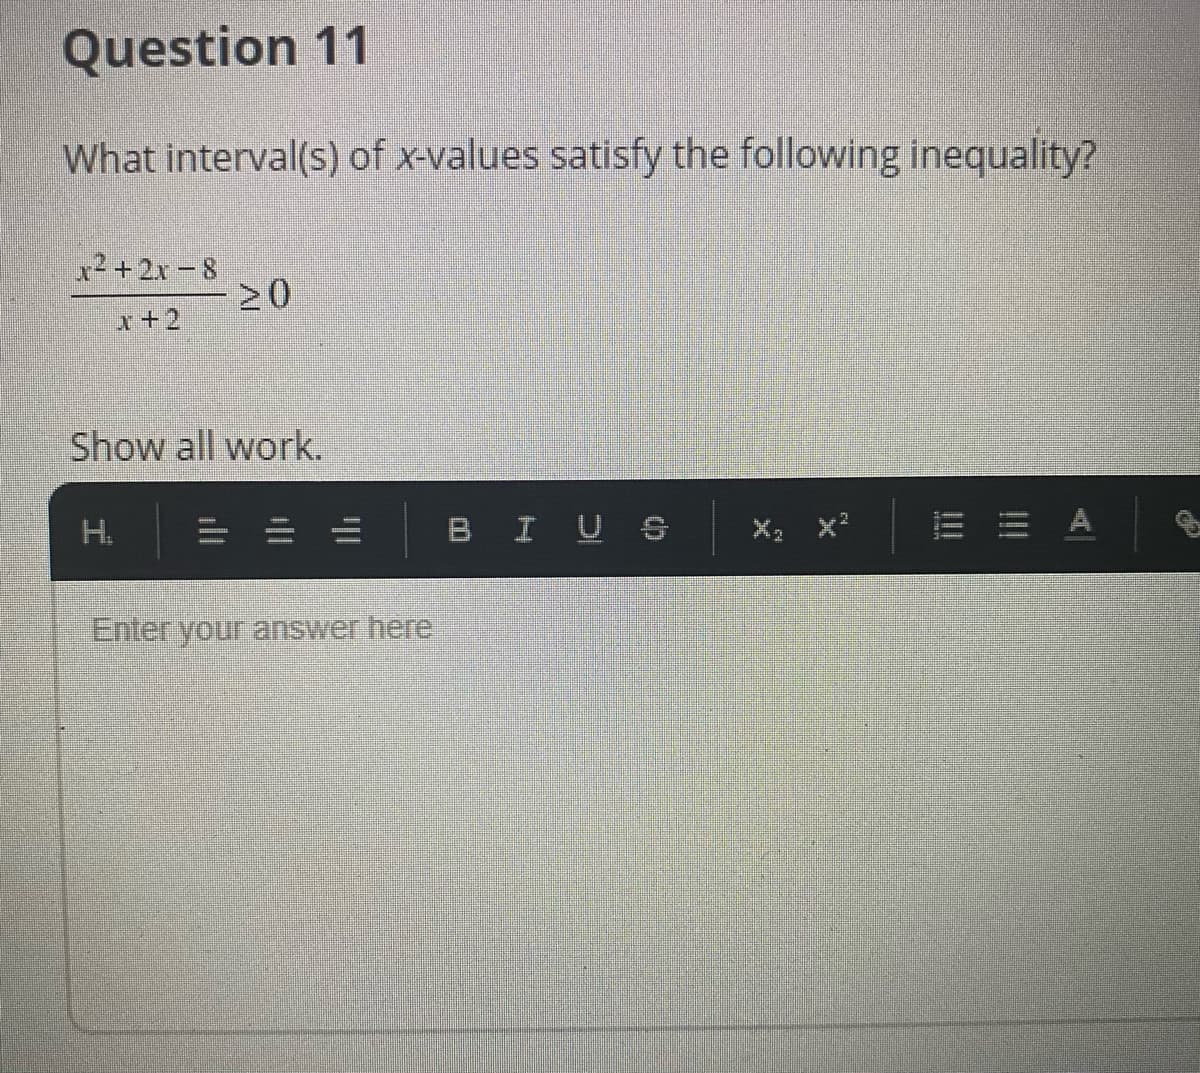 Question 11
What interval(s) of x-values satisfy the following inequality?
12+2x-8
20
x+2
Show all work.
H.
BIU S
E = A
Enter your answer here
ll
